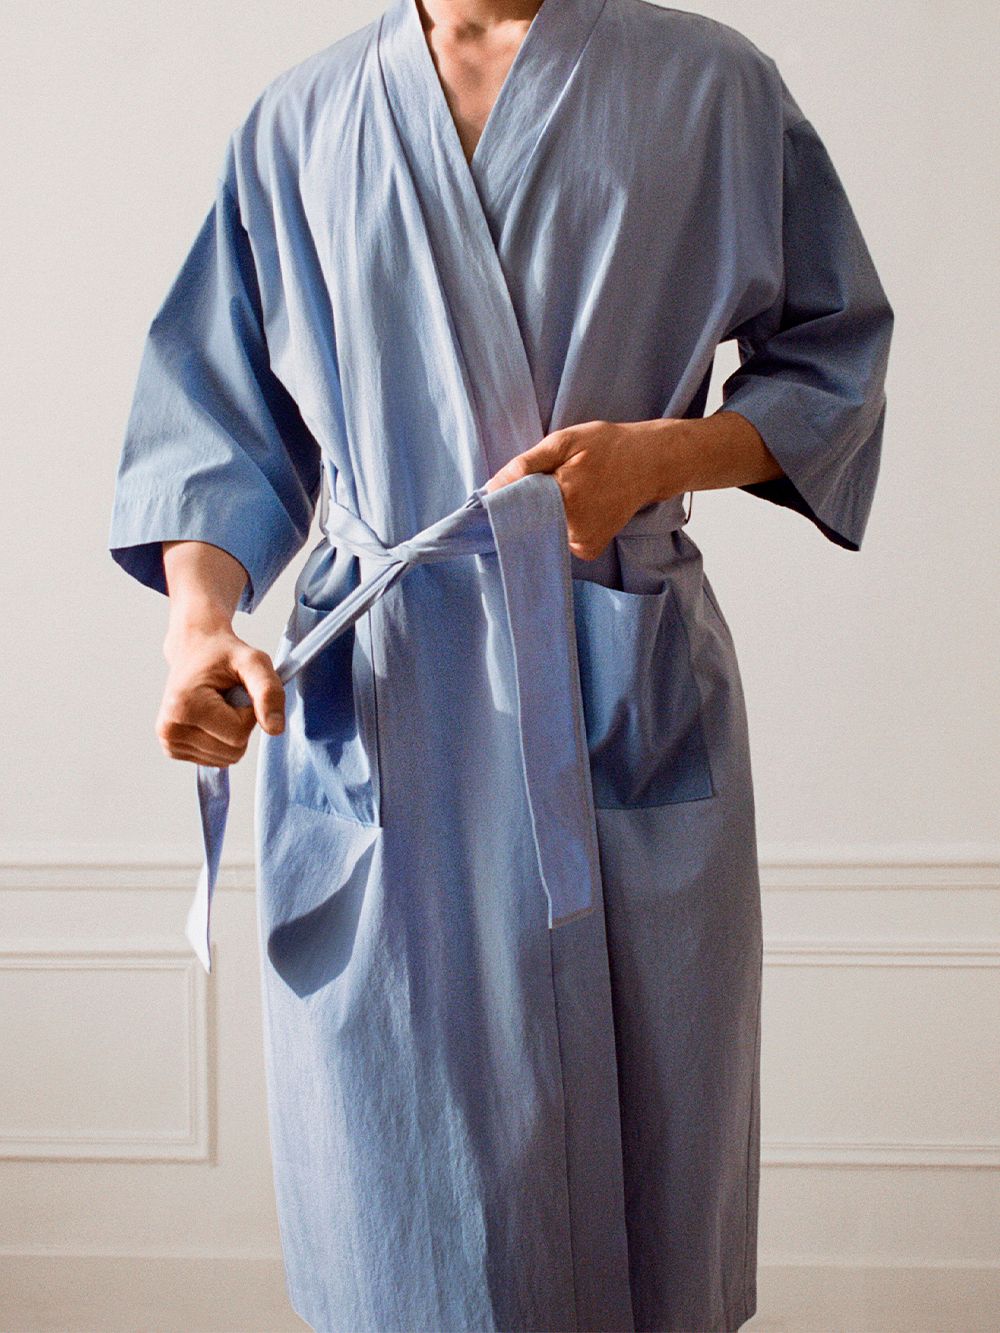 HAY Duo robe, one size, sky blue